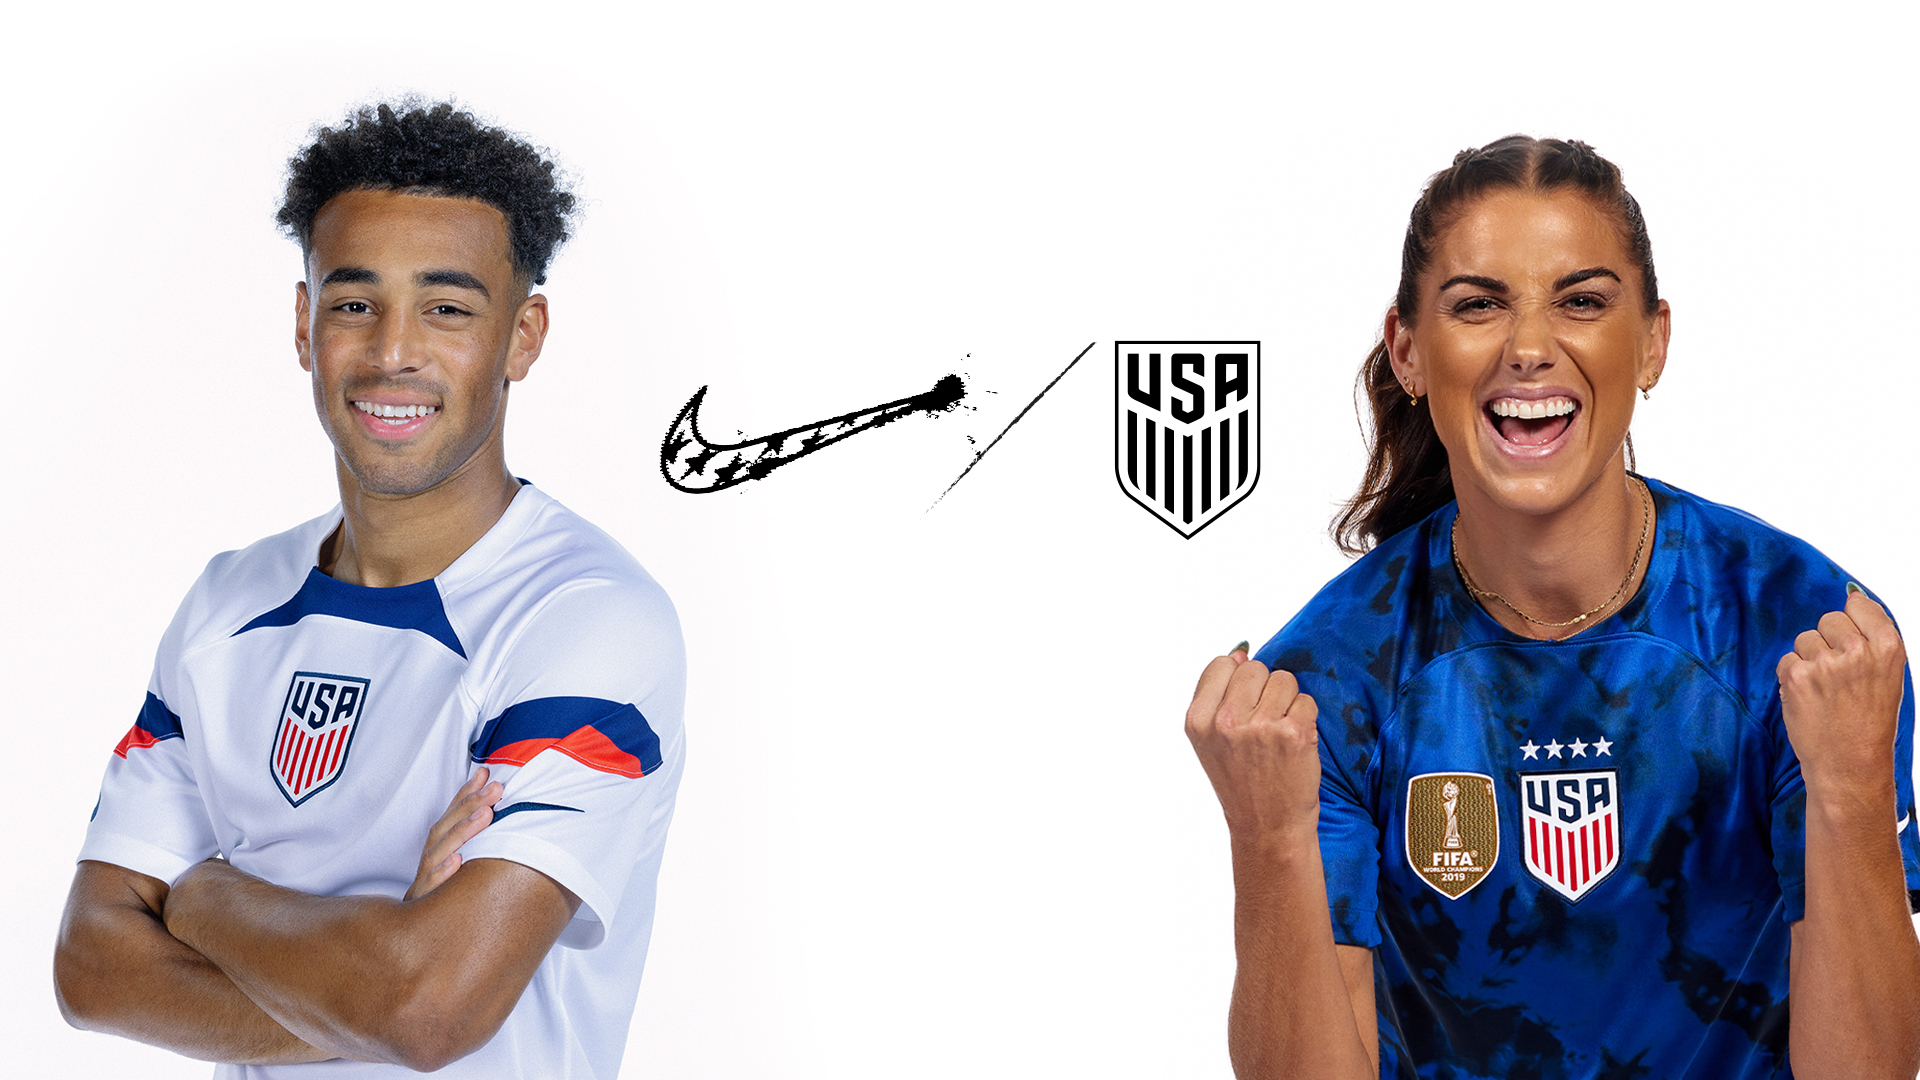 usa soccer jersey for world cup